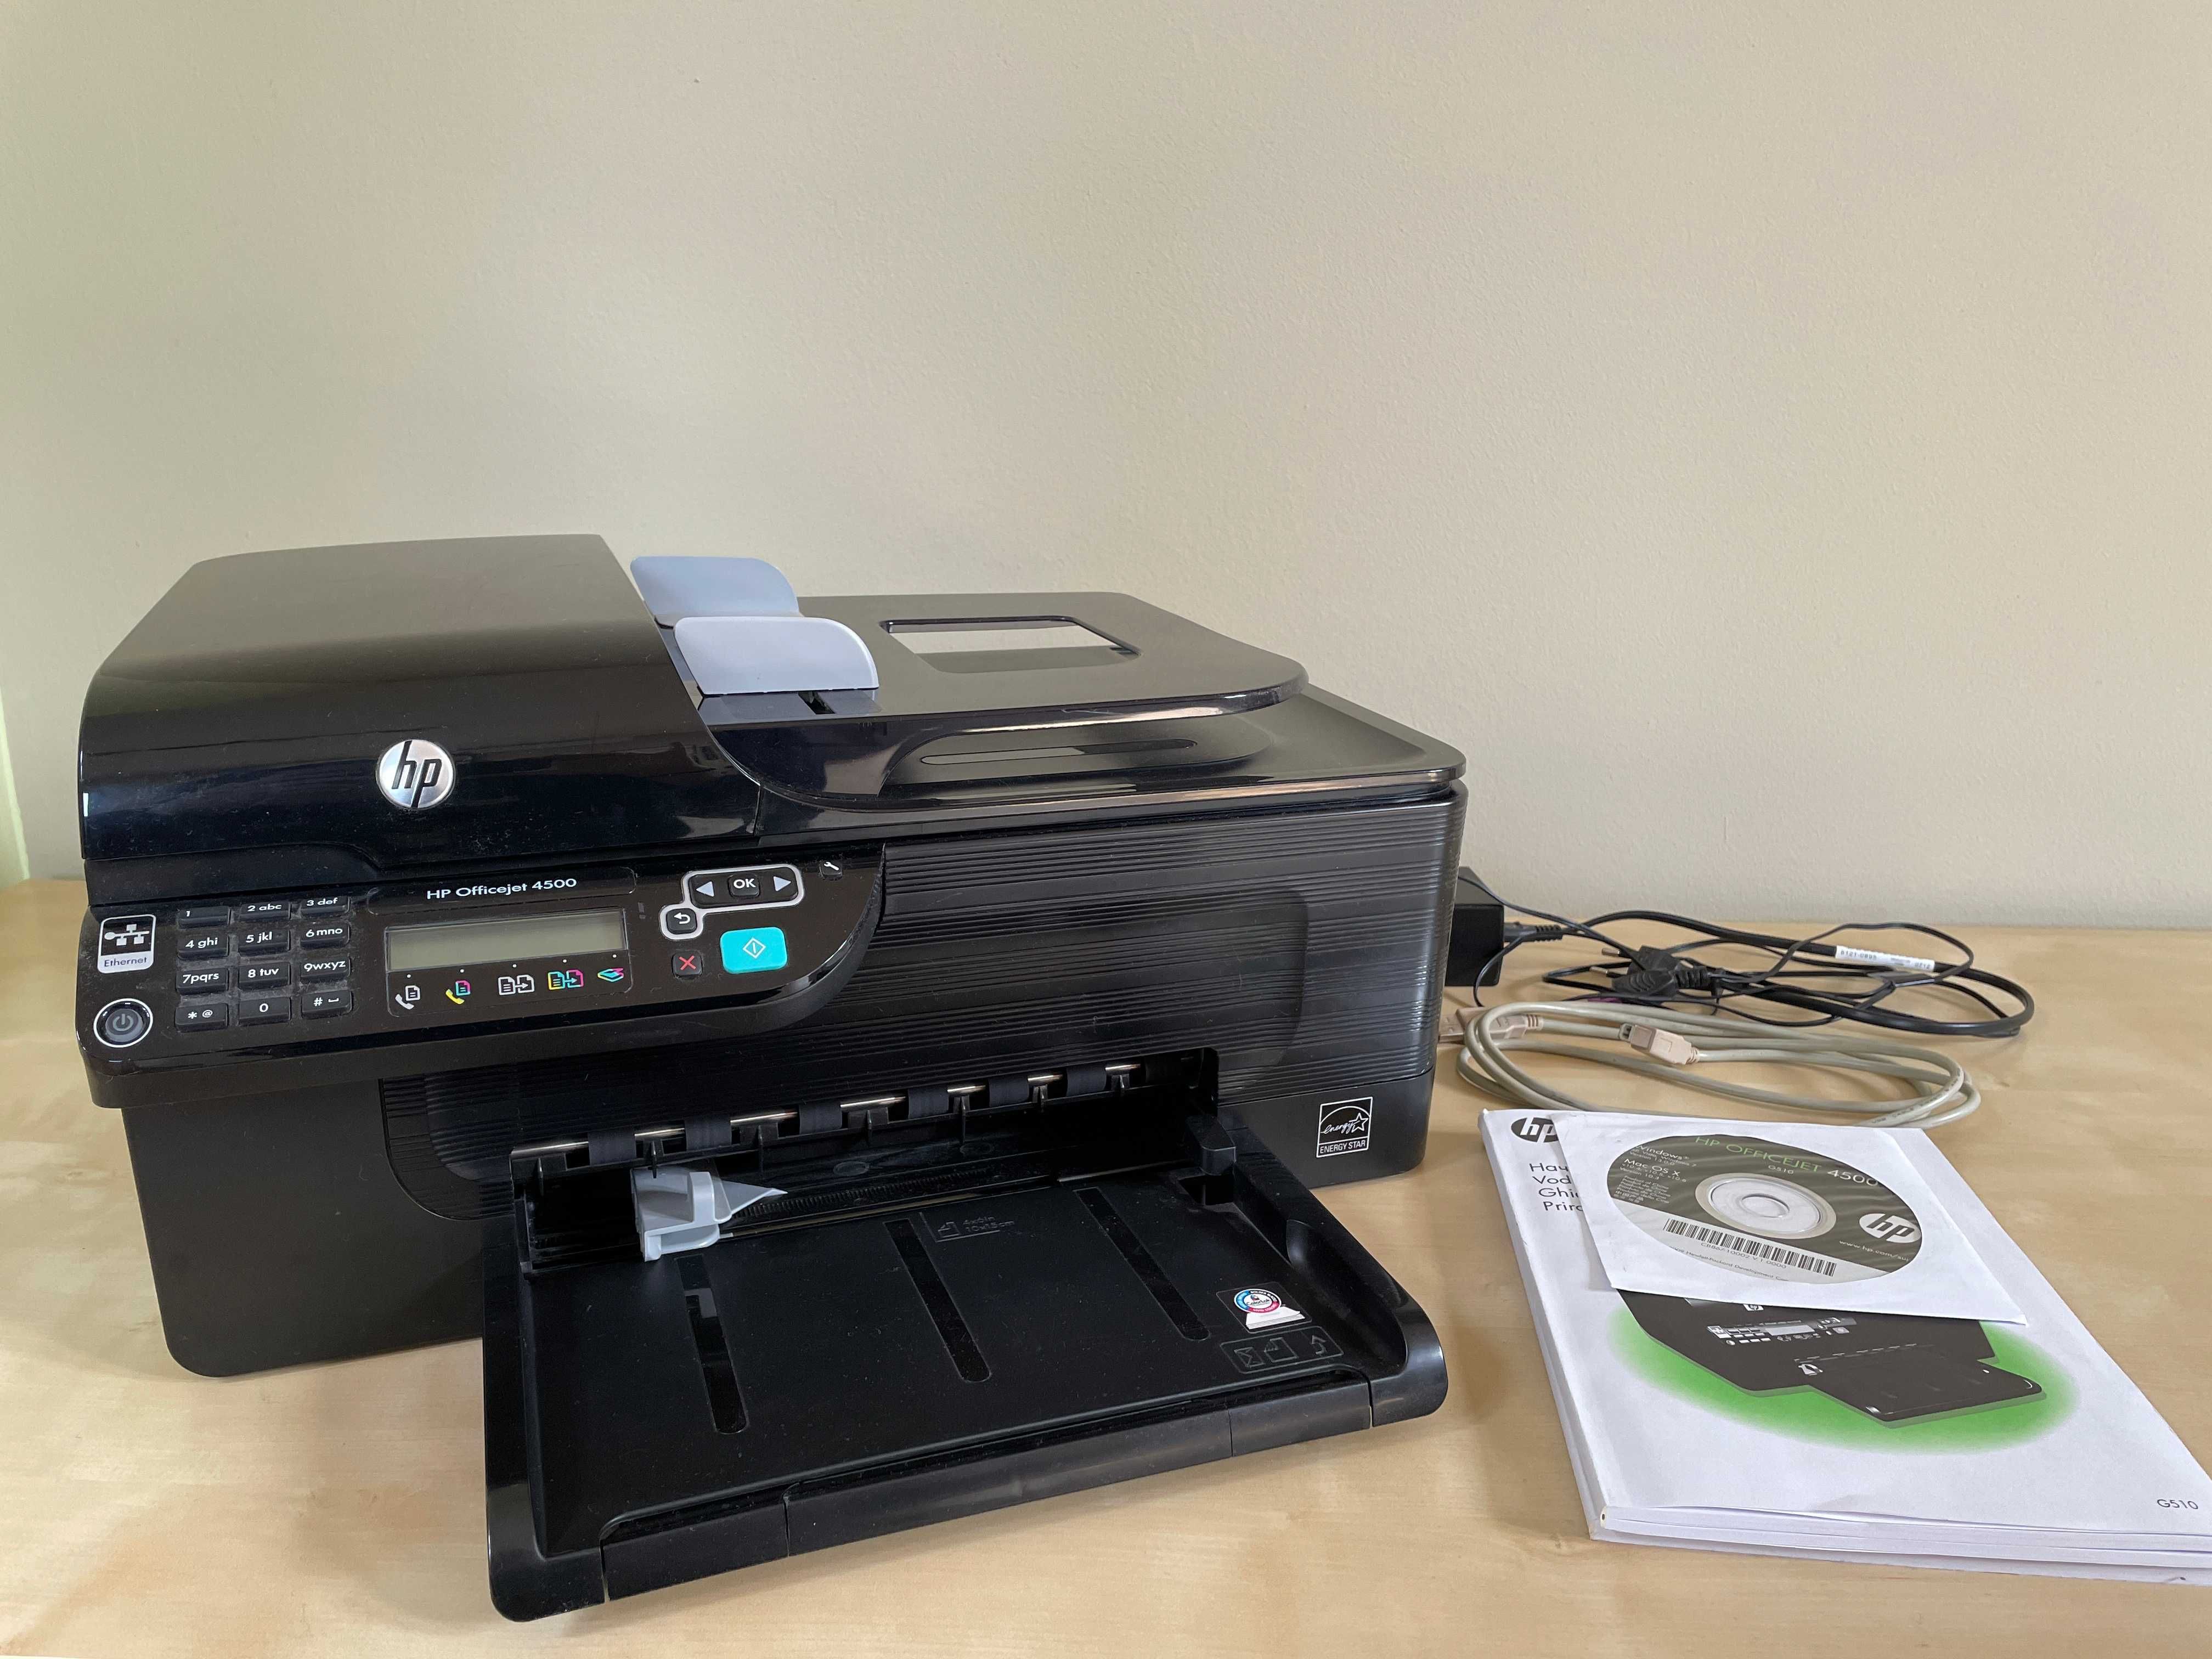 our Upstream Round Imprimanta HP Officejet 4500 (Multifunctionala - Scanner / Fax / Net) Iasi  • OLX.ro